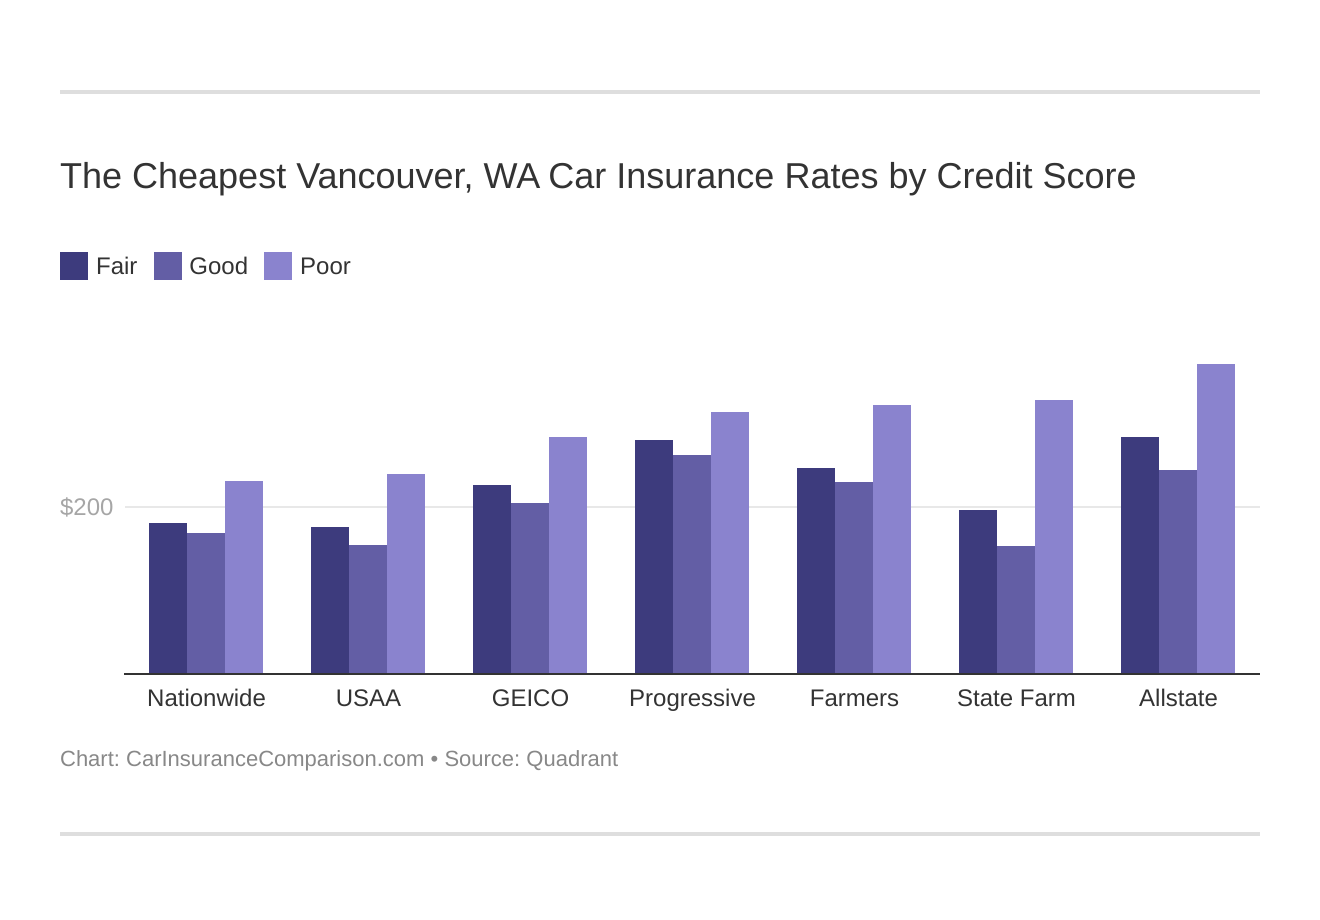 The Cheapest Vancouver, WA Car Insurance Rates by Credit Score